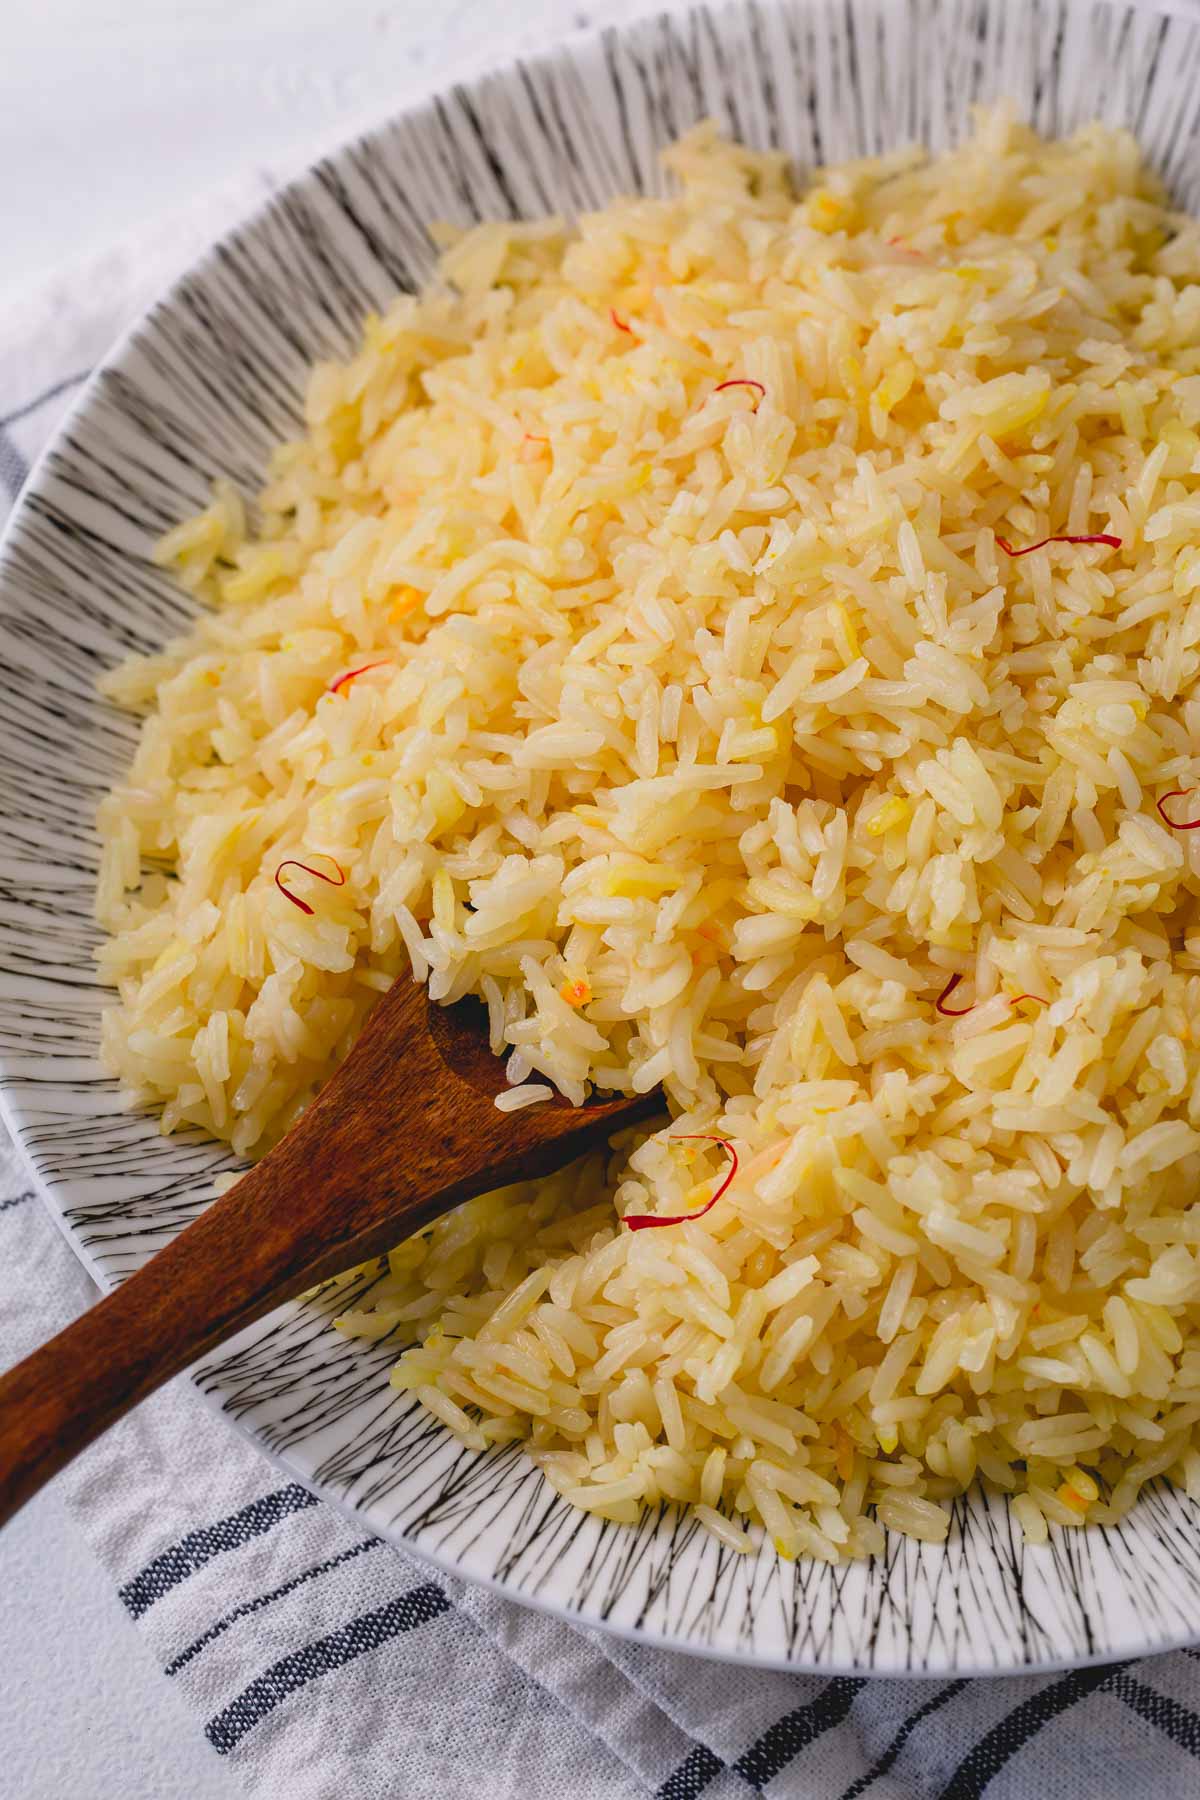 Saffron rice in bowl with wooden spoon
